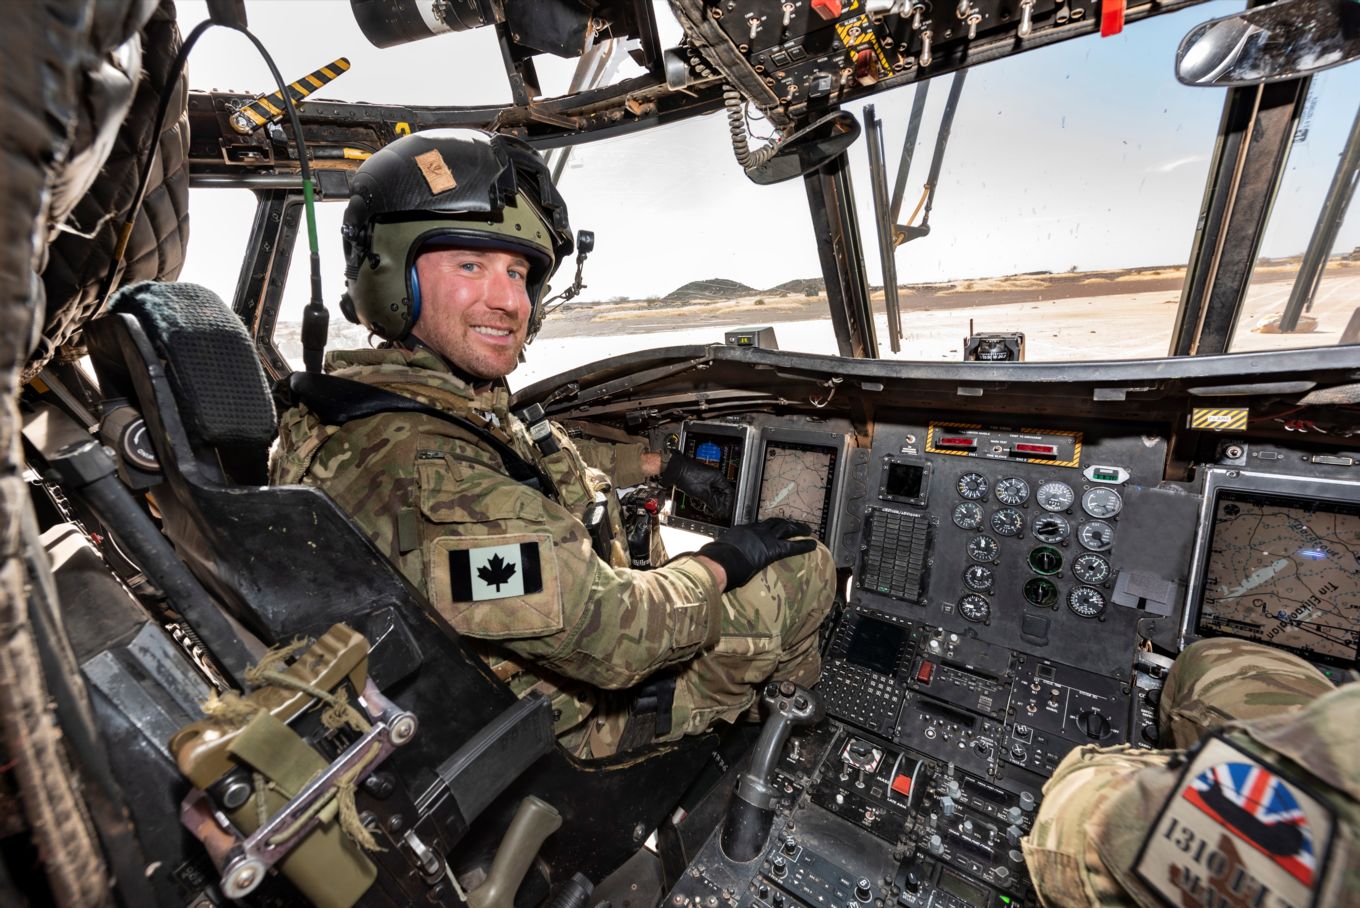 Image shows a Chinook helicopter pilot sat in the cockpit.